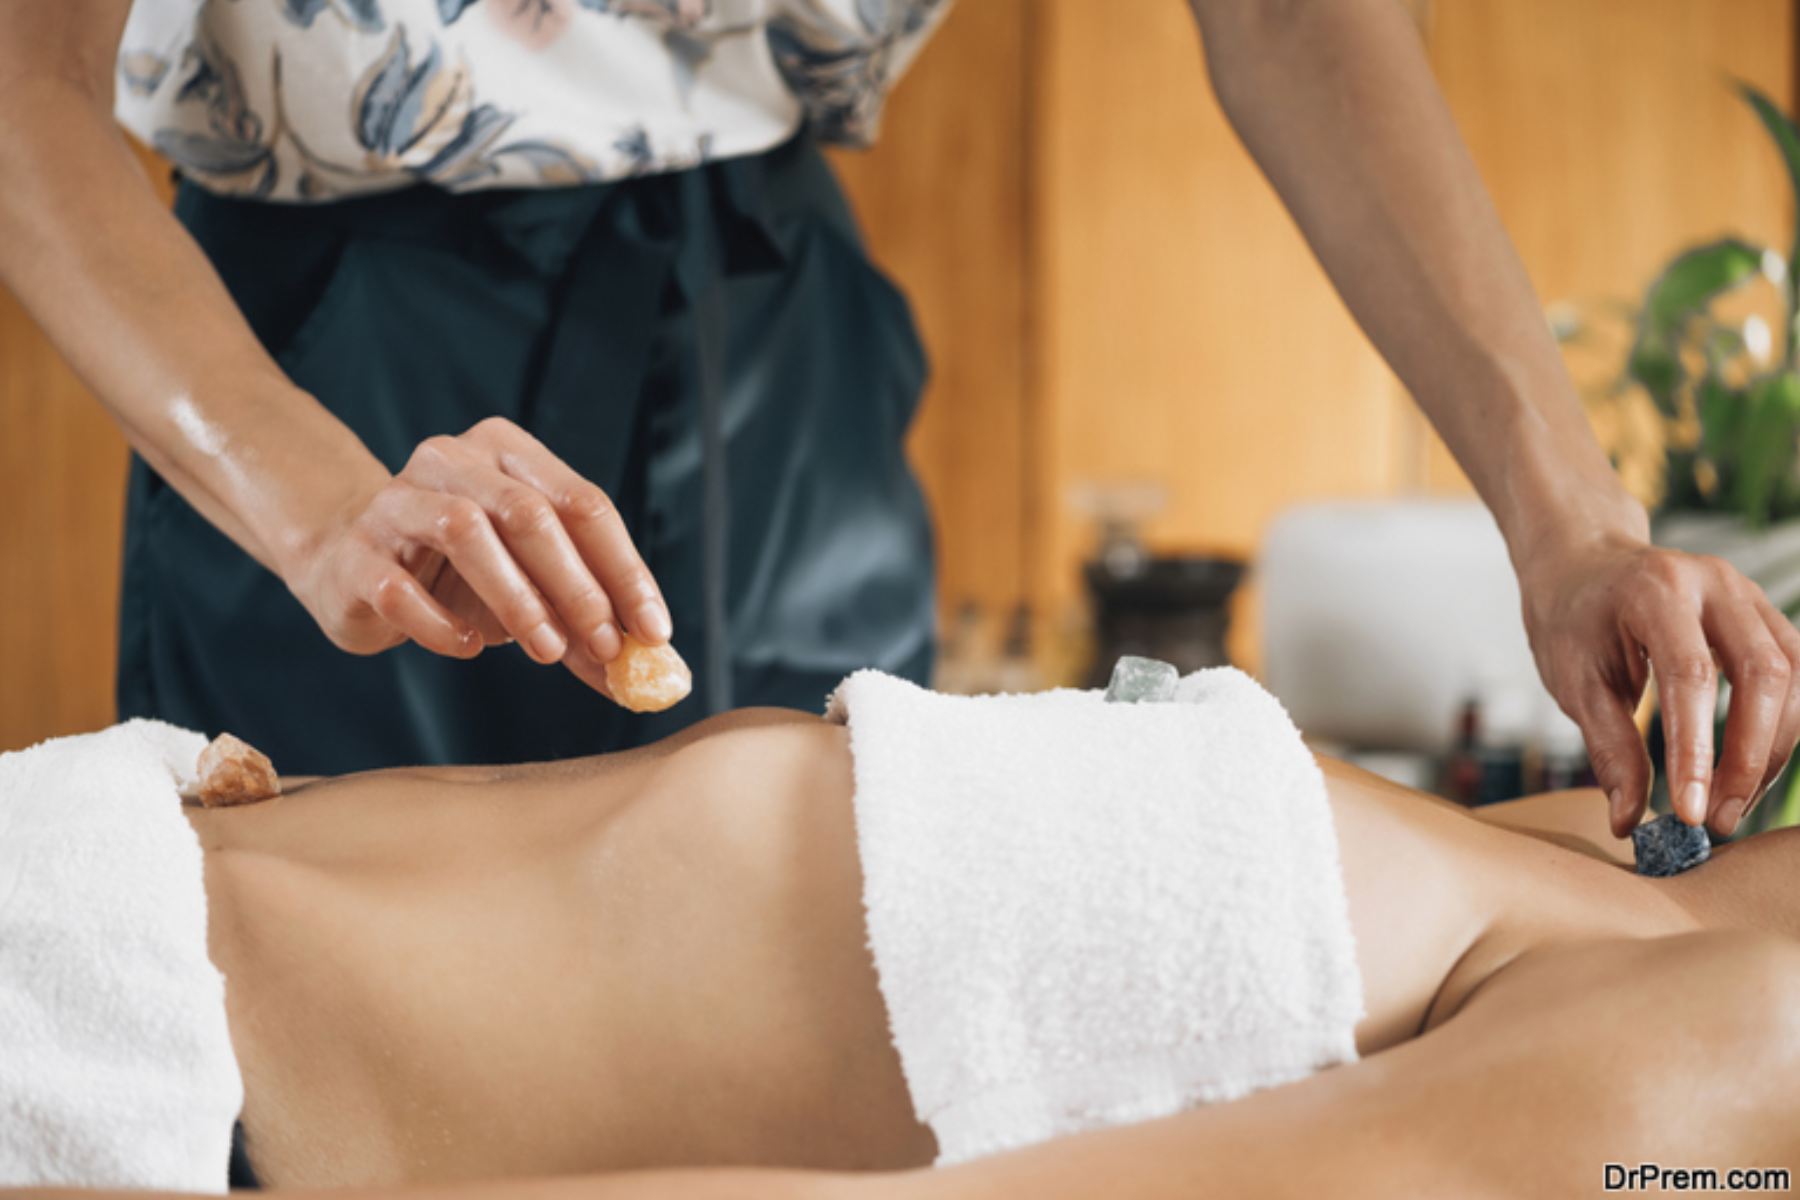 A bodywork therapist placing gemstones on a female client's abdomen and neck during a therapy session